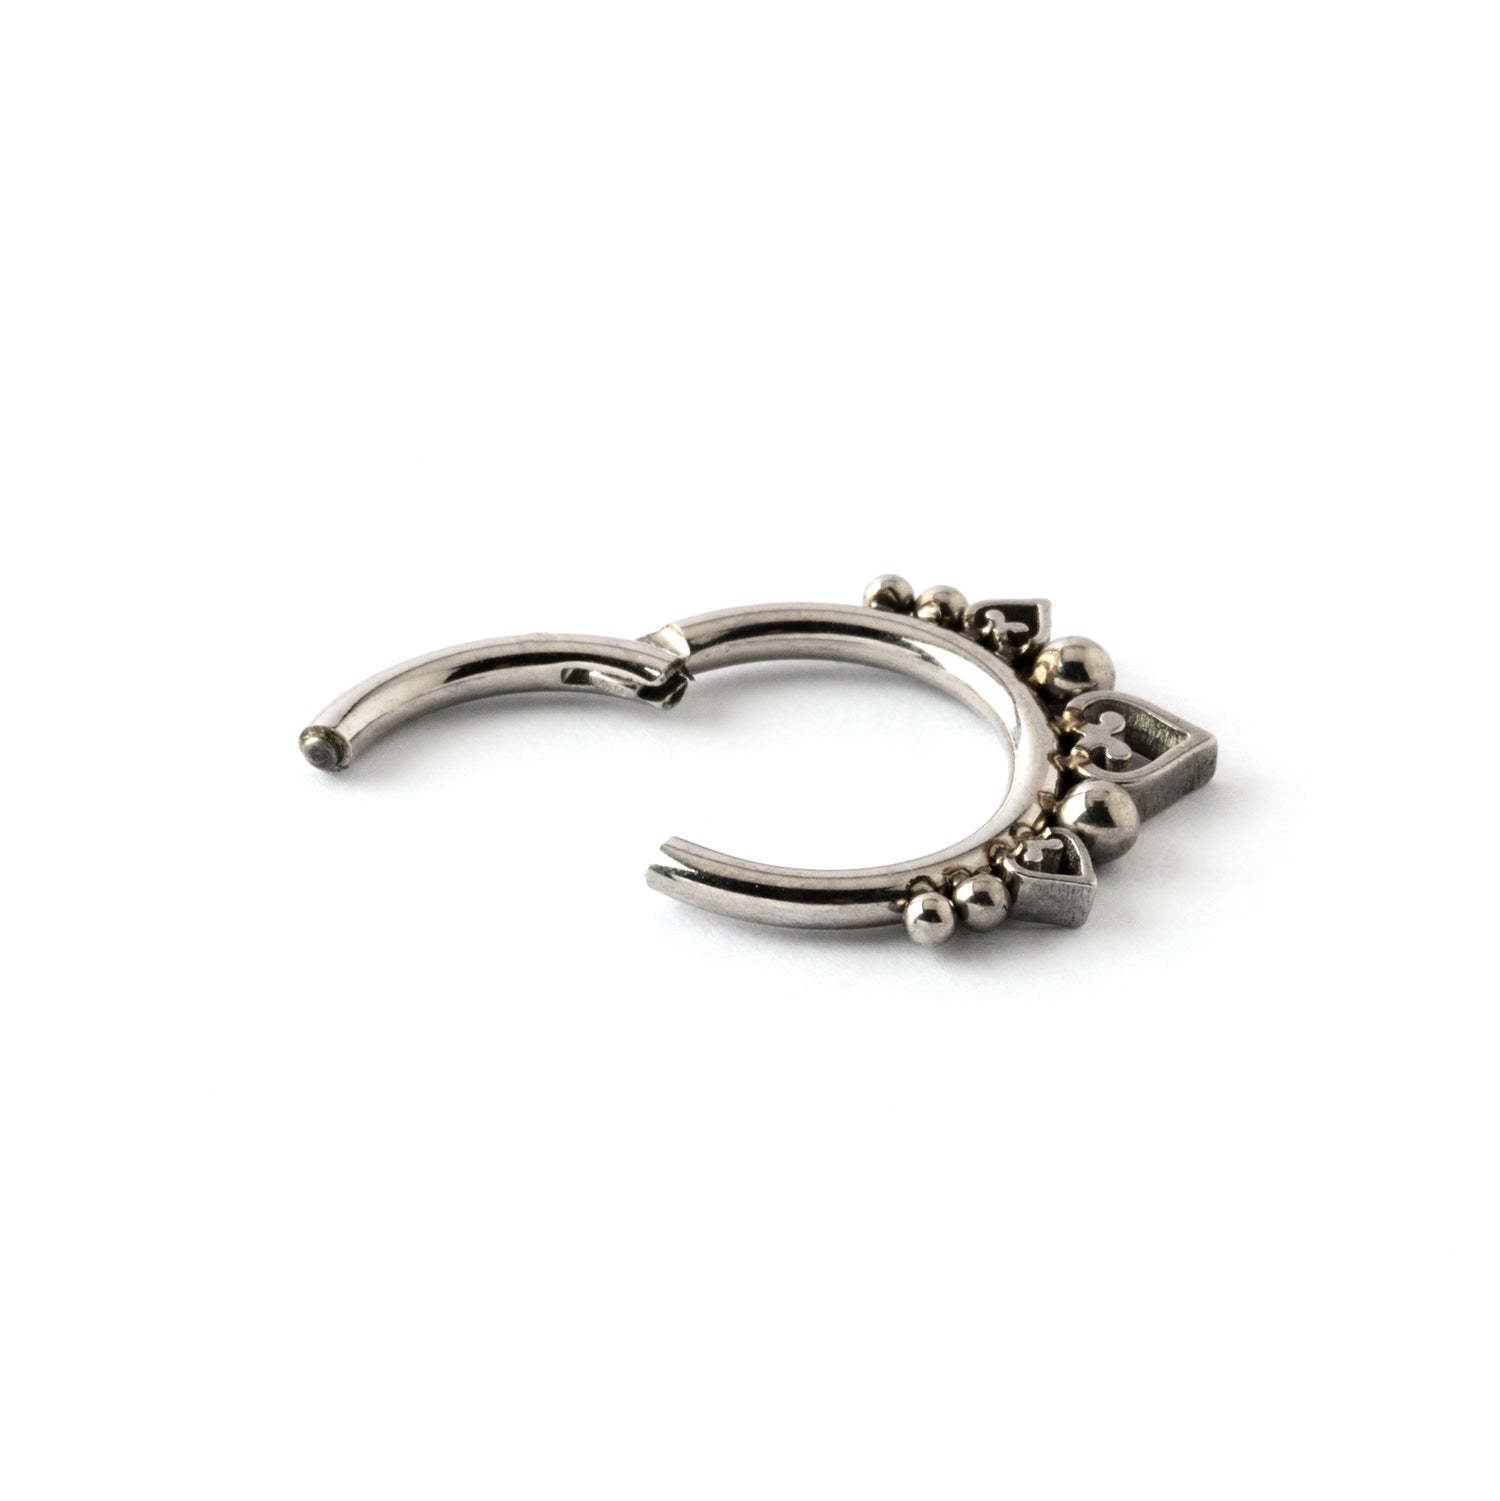 surgical steel hinged segment ring with spheres and hearts ornaments click on closure